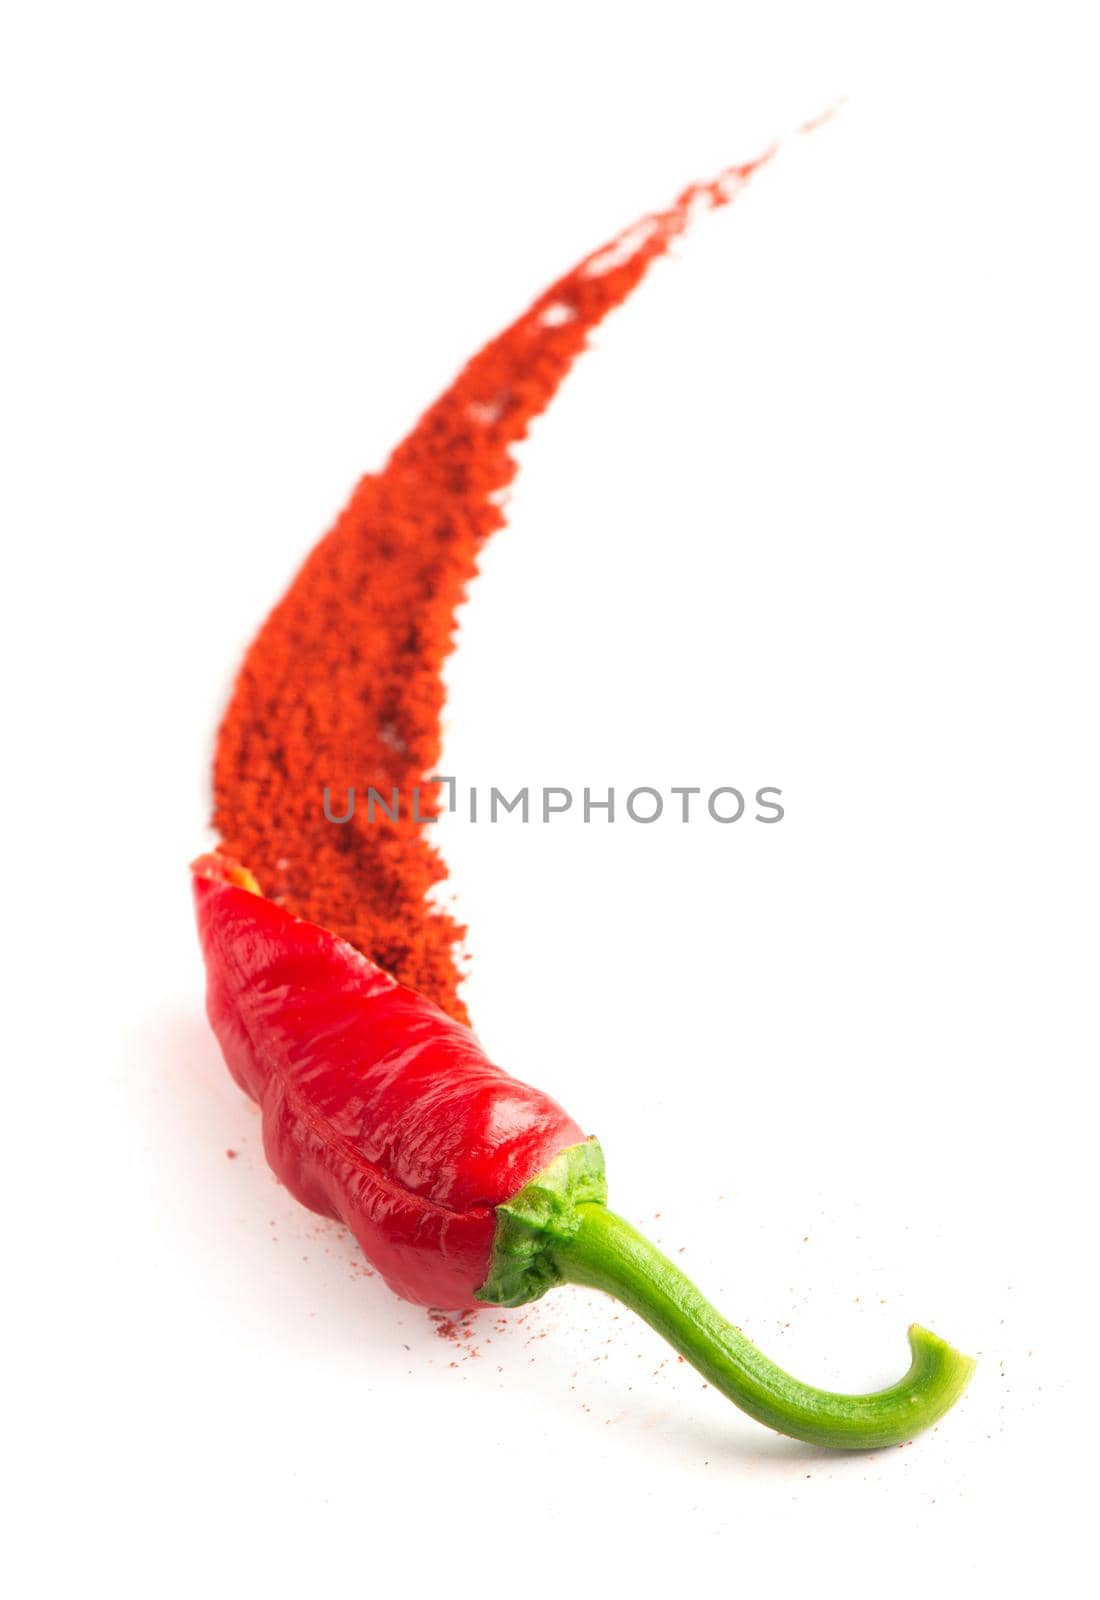 Red hot chilies with powder over white background.